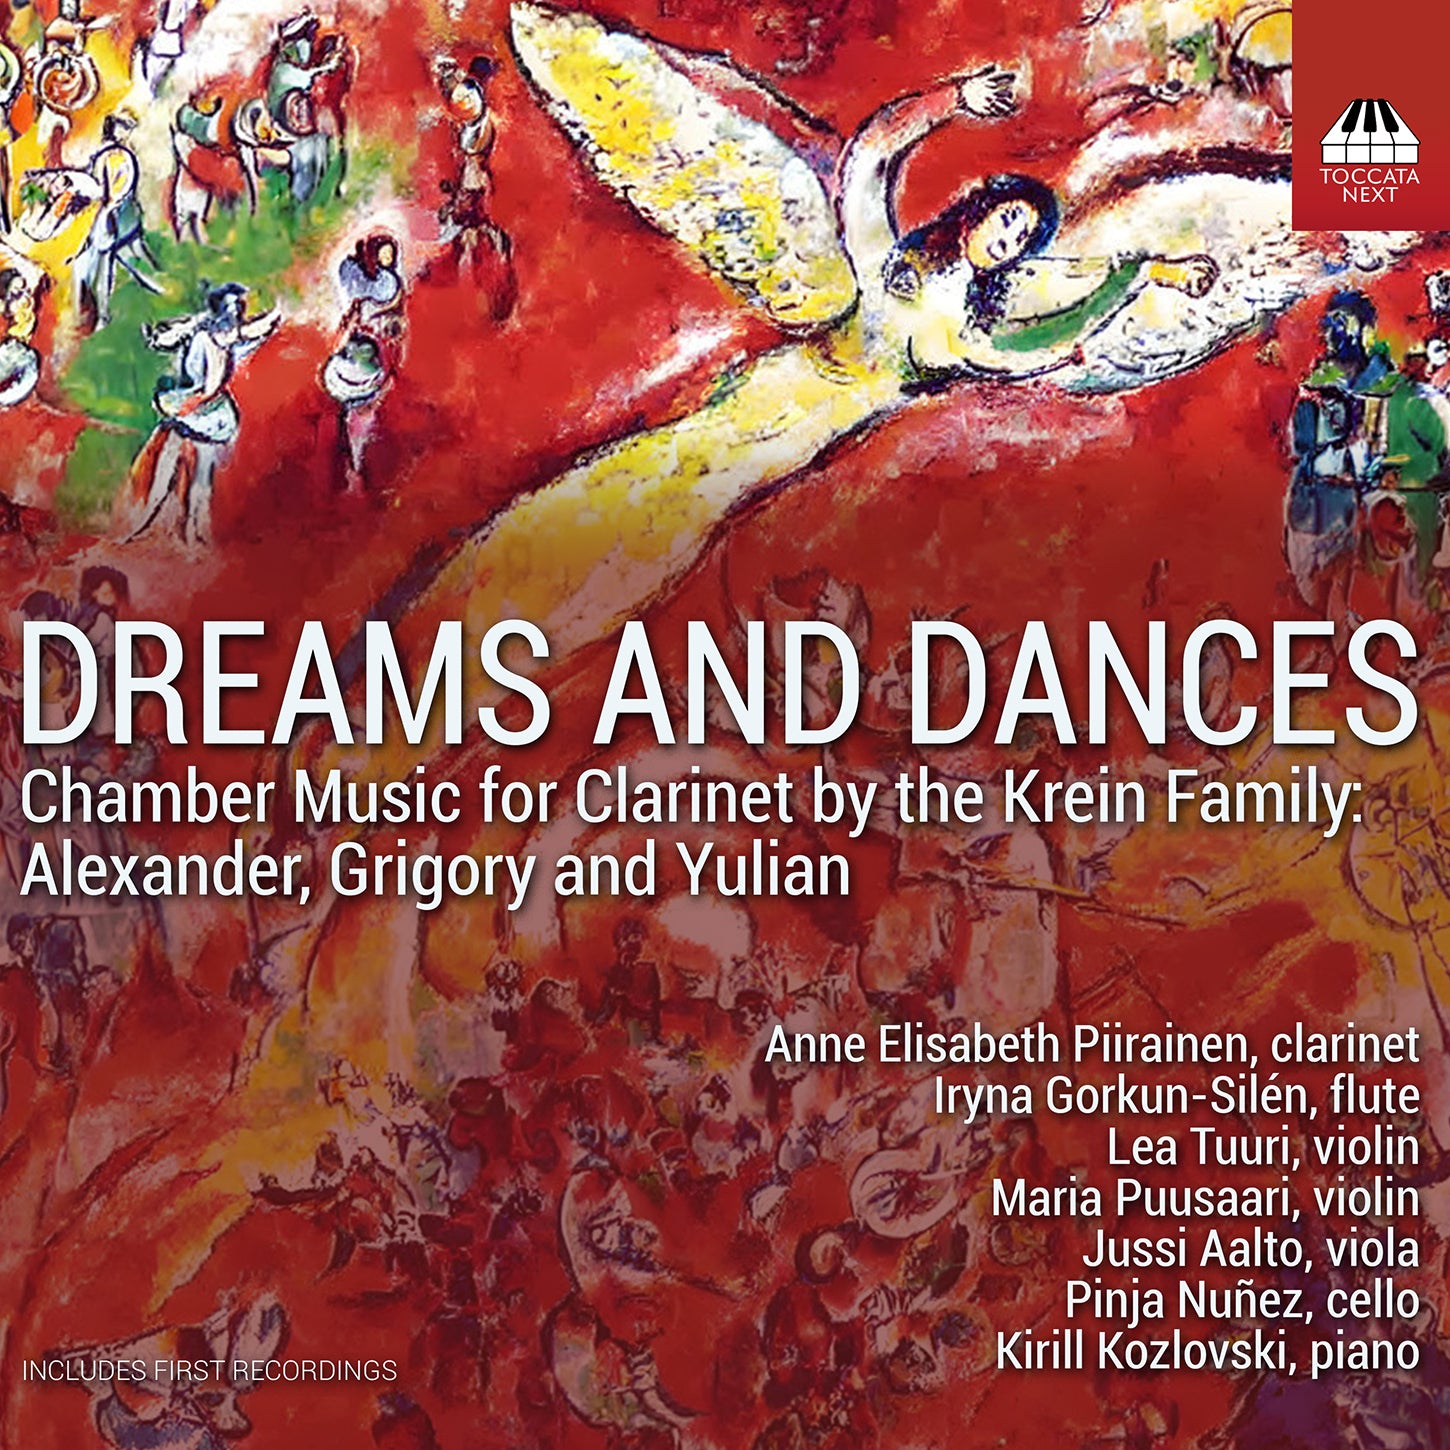 Dreams & Dances - Clarinet Chamber Music by the Krein Family